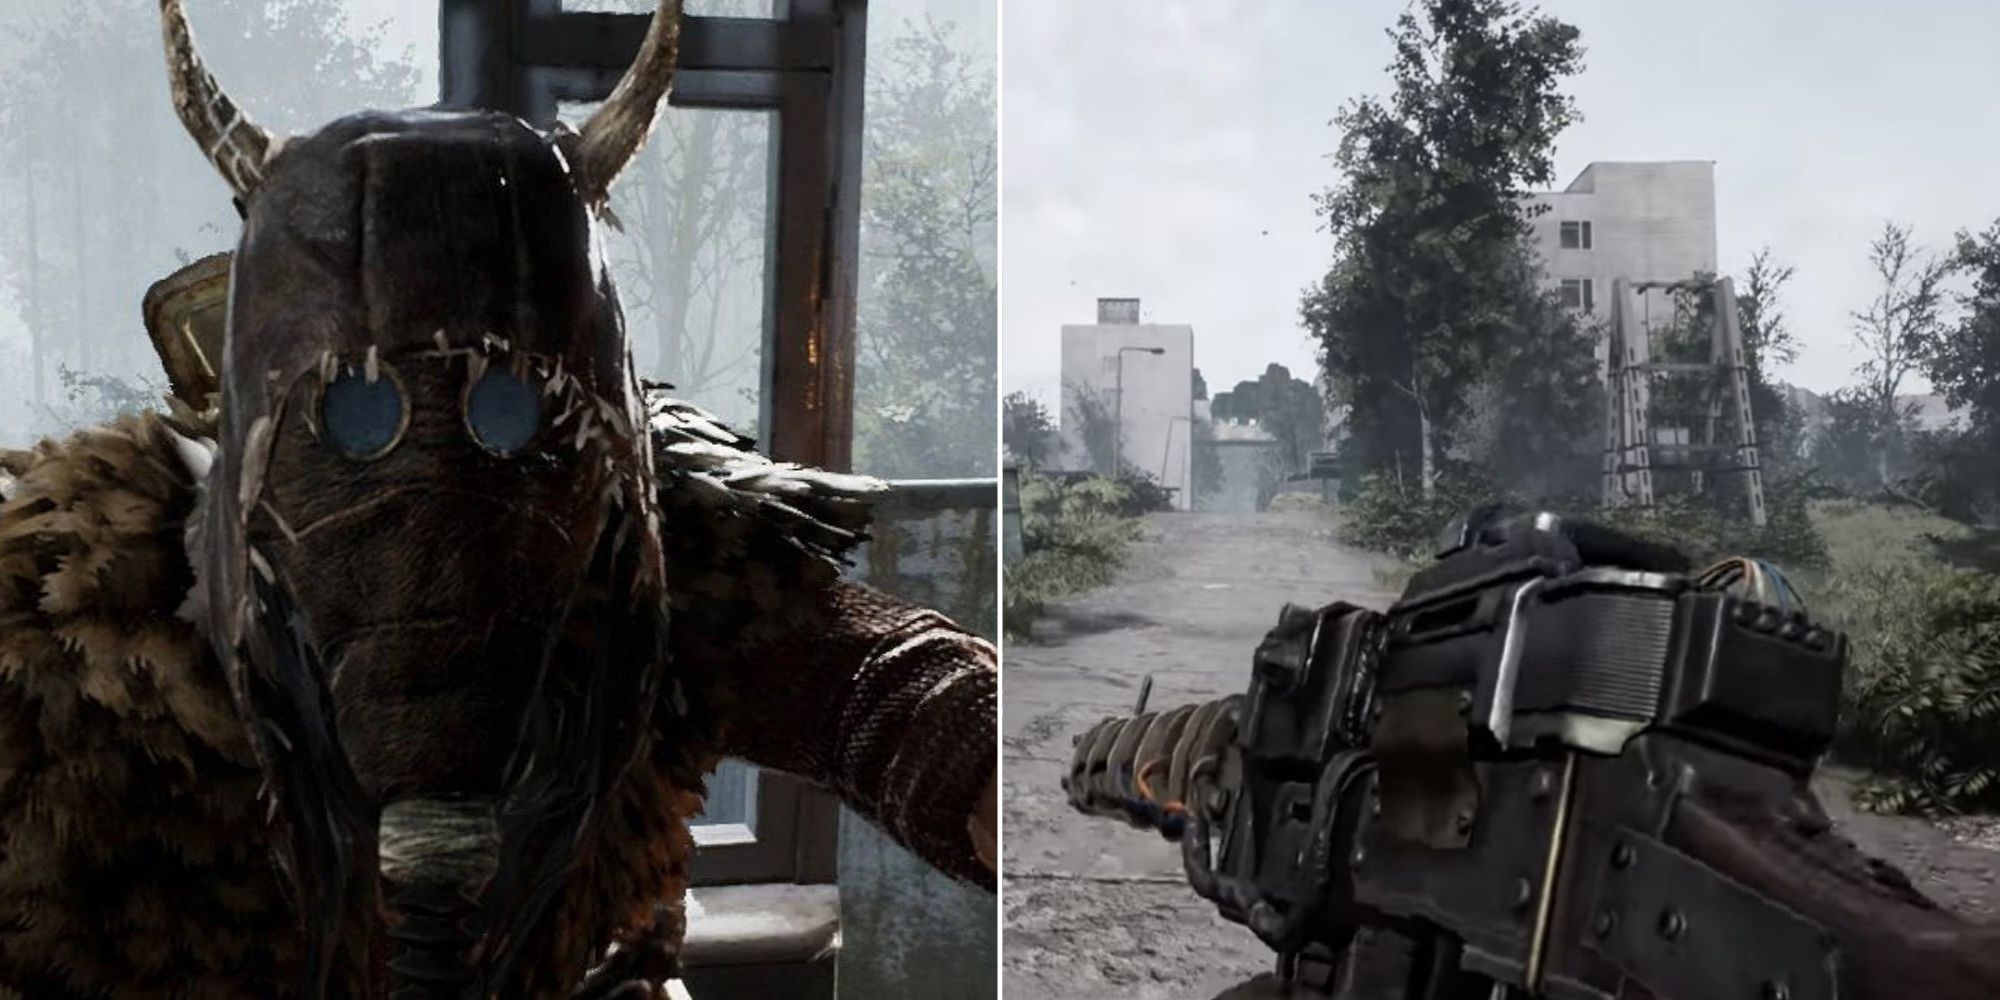 On the left there is a close up of Tarakan and the right shows the player holding a railgun in Chernobylite